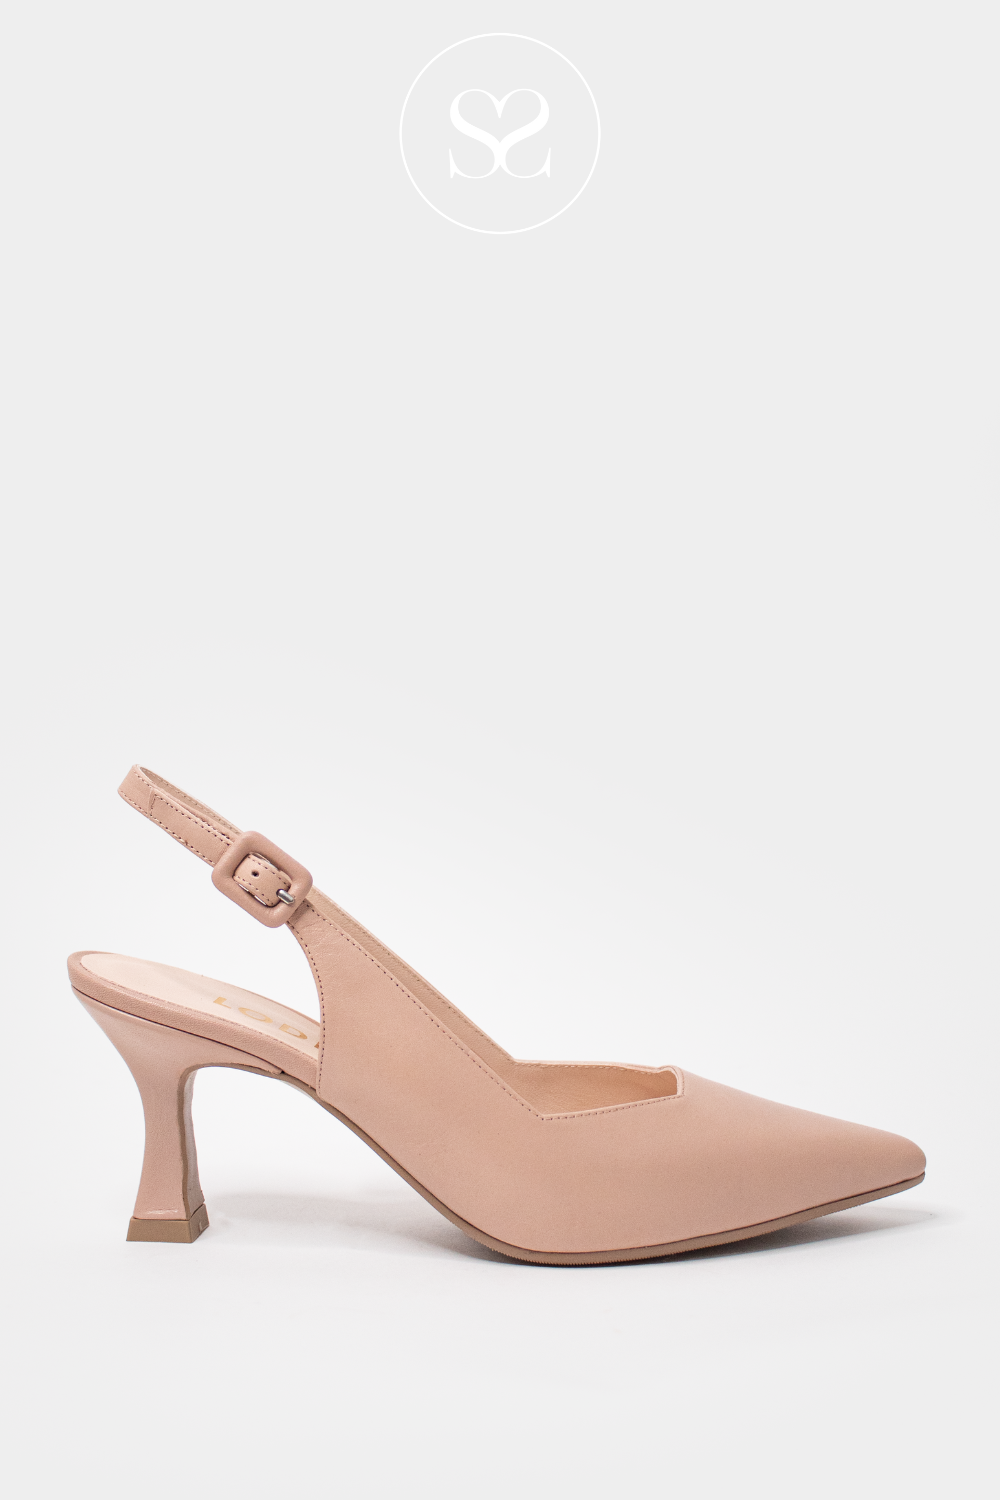 LODI MID HEELS IN NUDE WITH SLING BACK AND FLARED HEEL DESIGN